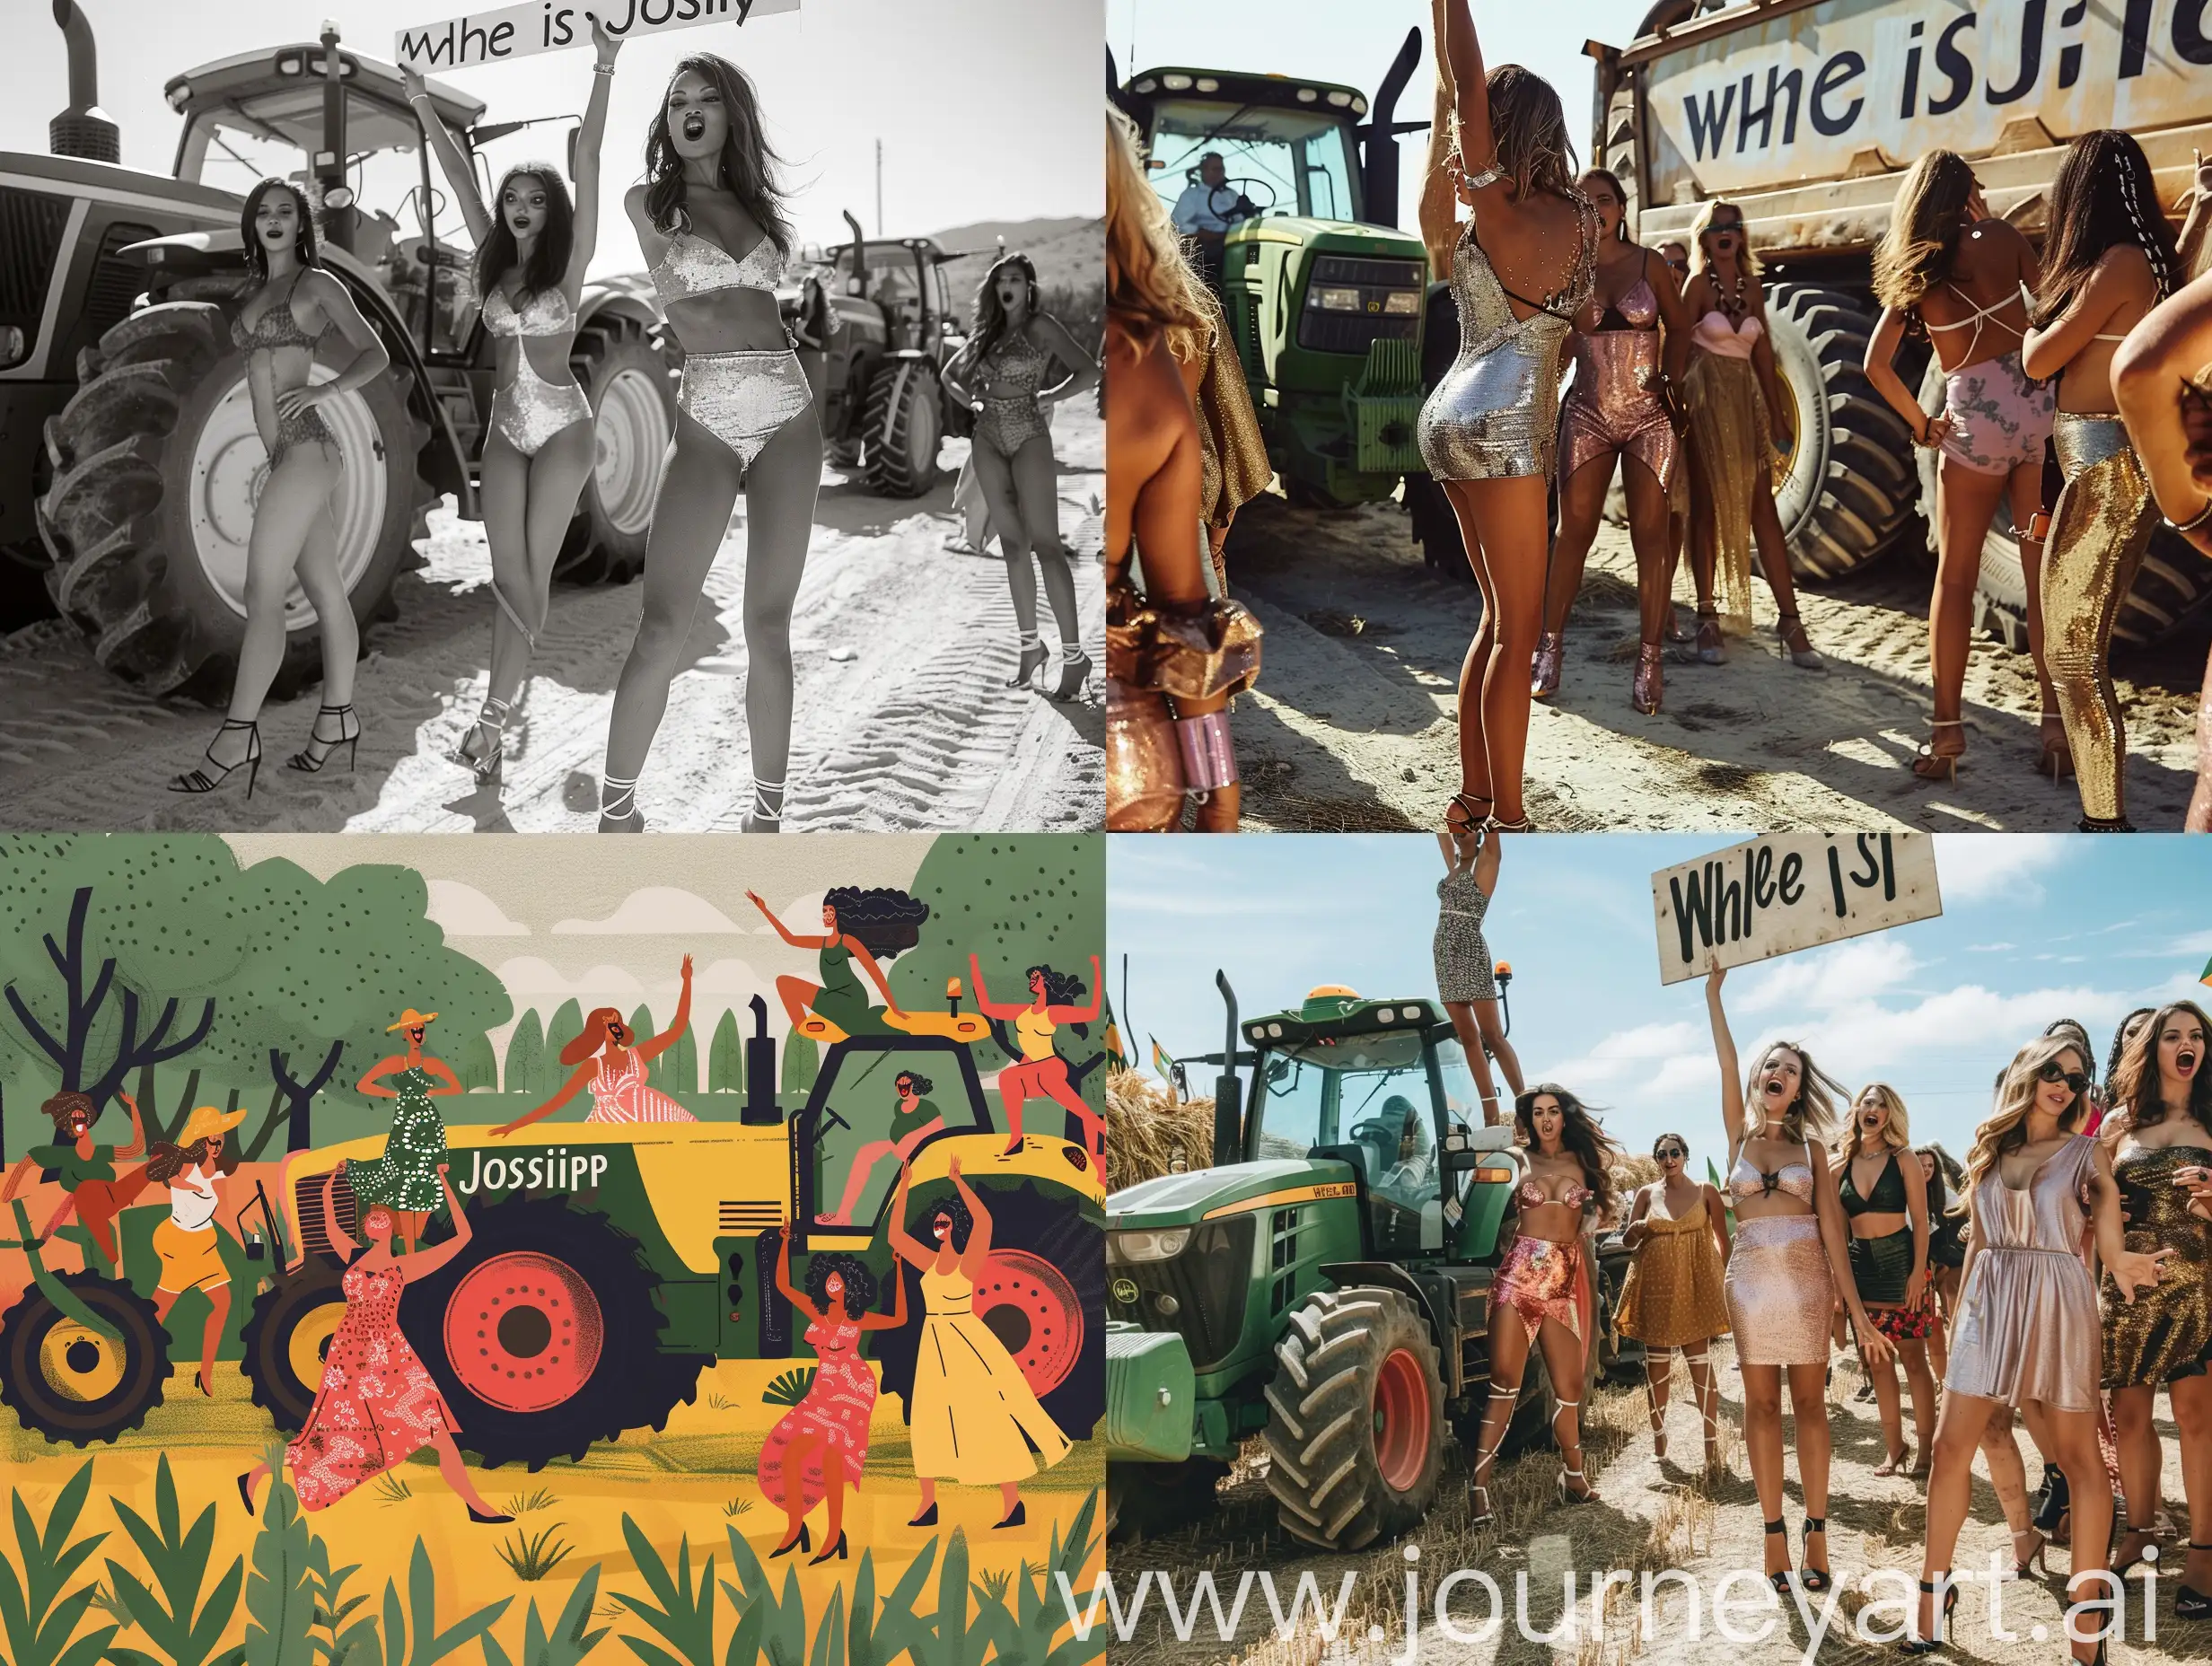 Beautiful brazilian womens in dresses and high heels are demonstrating in front of farm, near tractors, holding the holding large inscription on which is written "Where is Josip?"